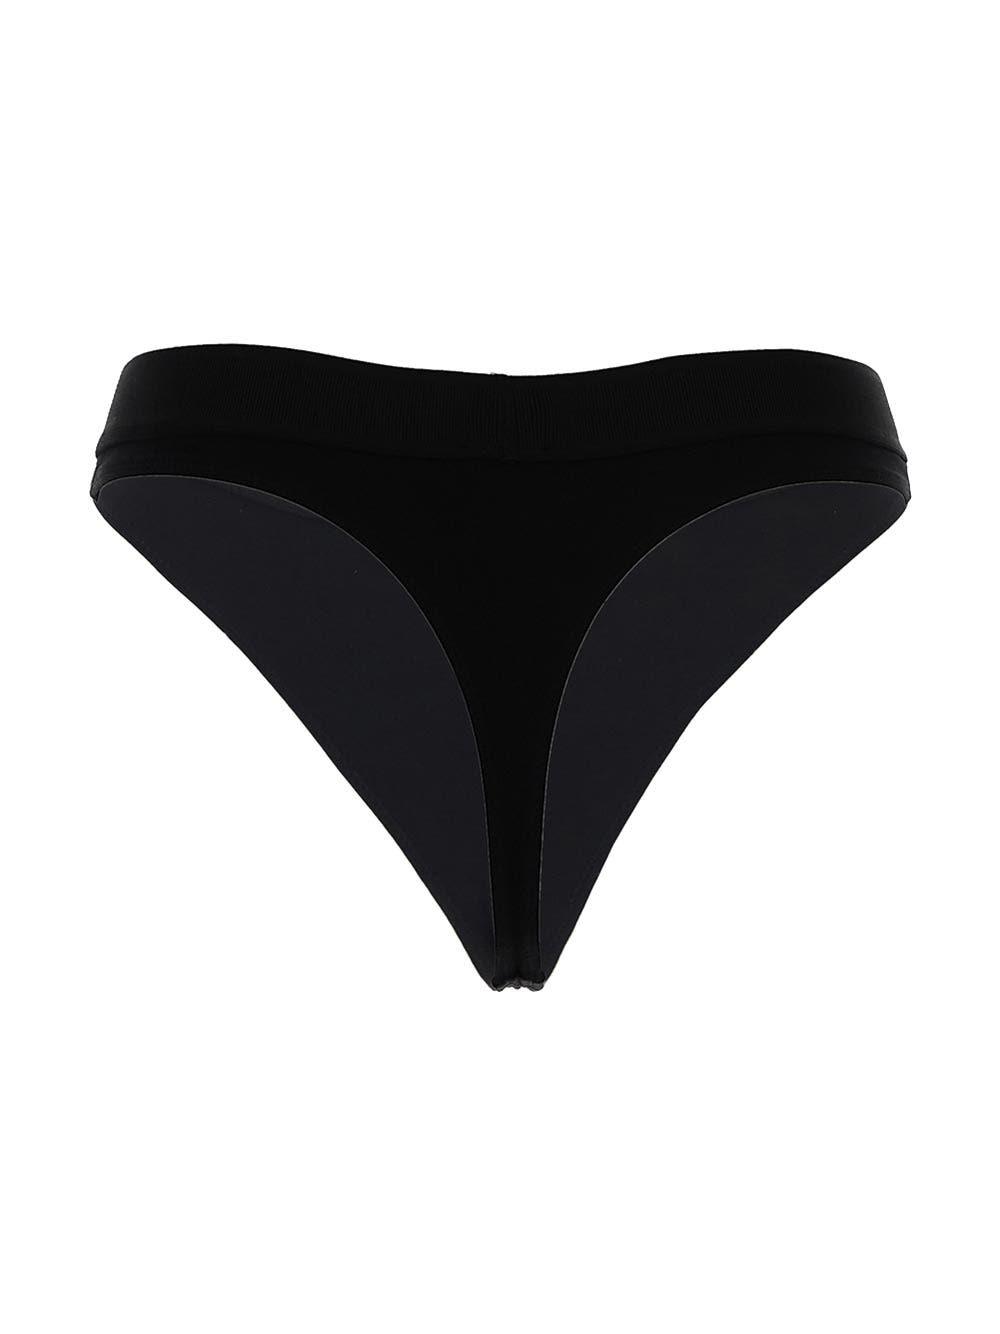 Shop Tom Ford Jersey Thong In Black